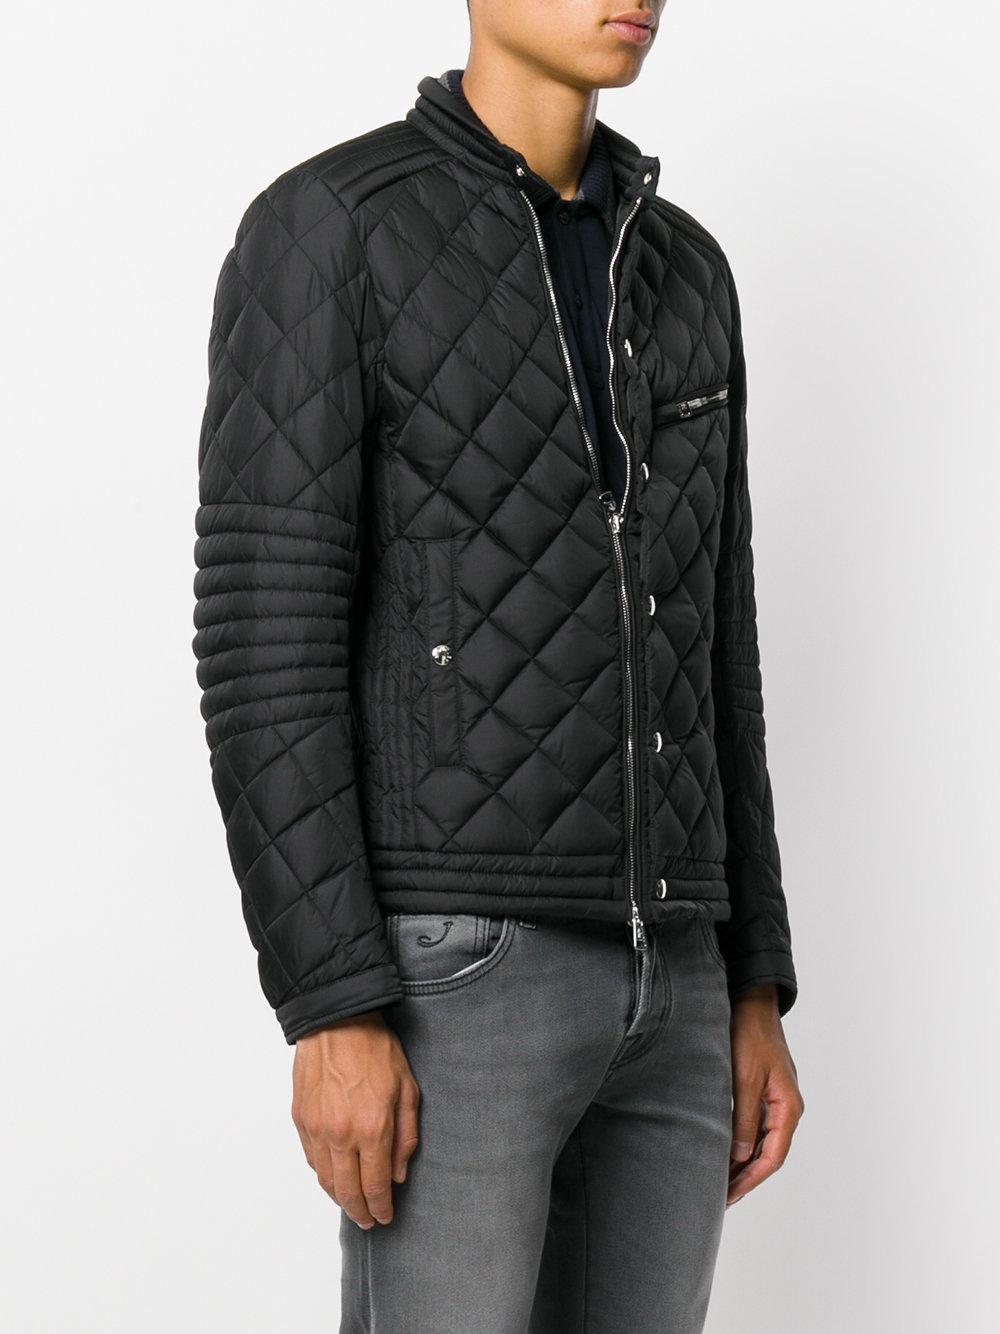 Moncler Synthetic Diamond Quilted Jacket in Black for Men - Lyst